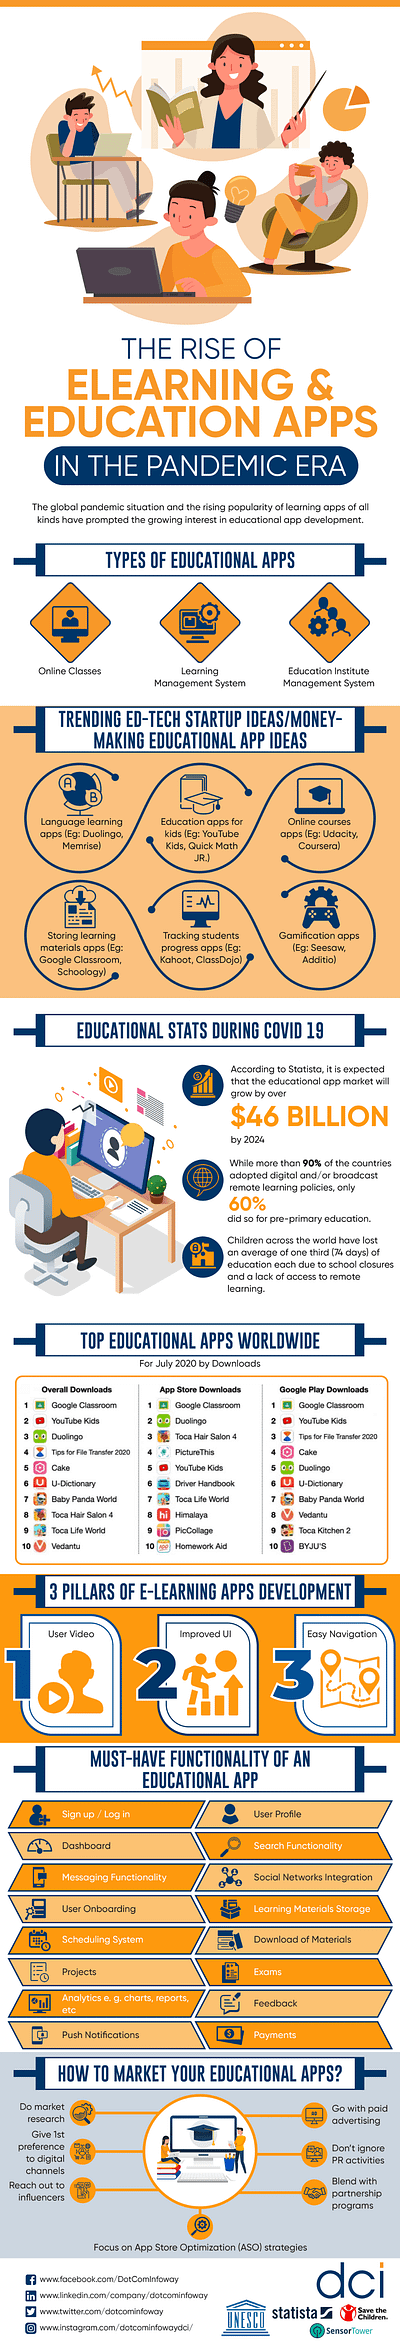 The Rise of eLearning & Education Apps in the Pandemic Era digitaleducation educationaltechnology educationapps educationinnovation elearning mobileapps